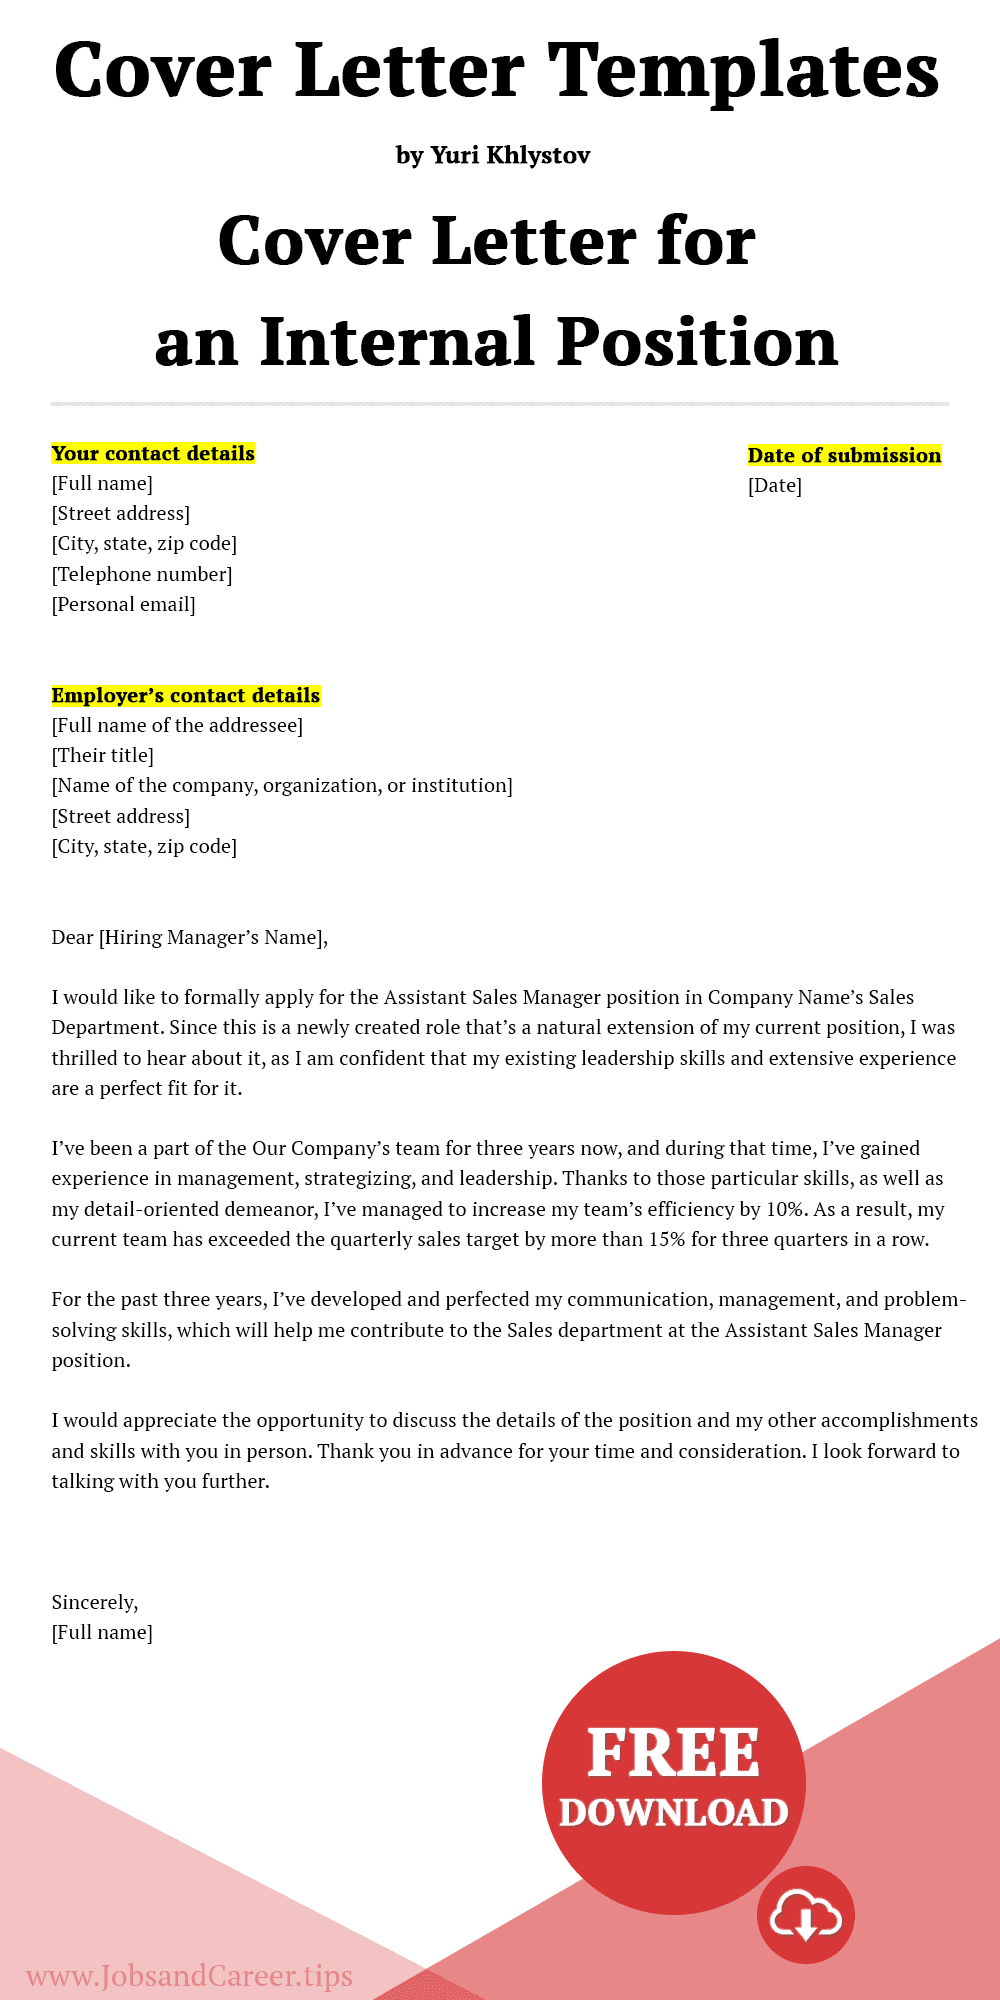 cover letter for internal position template